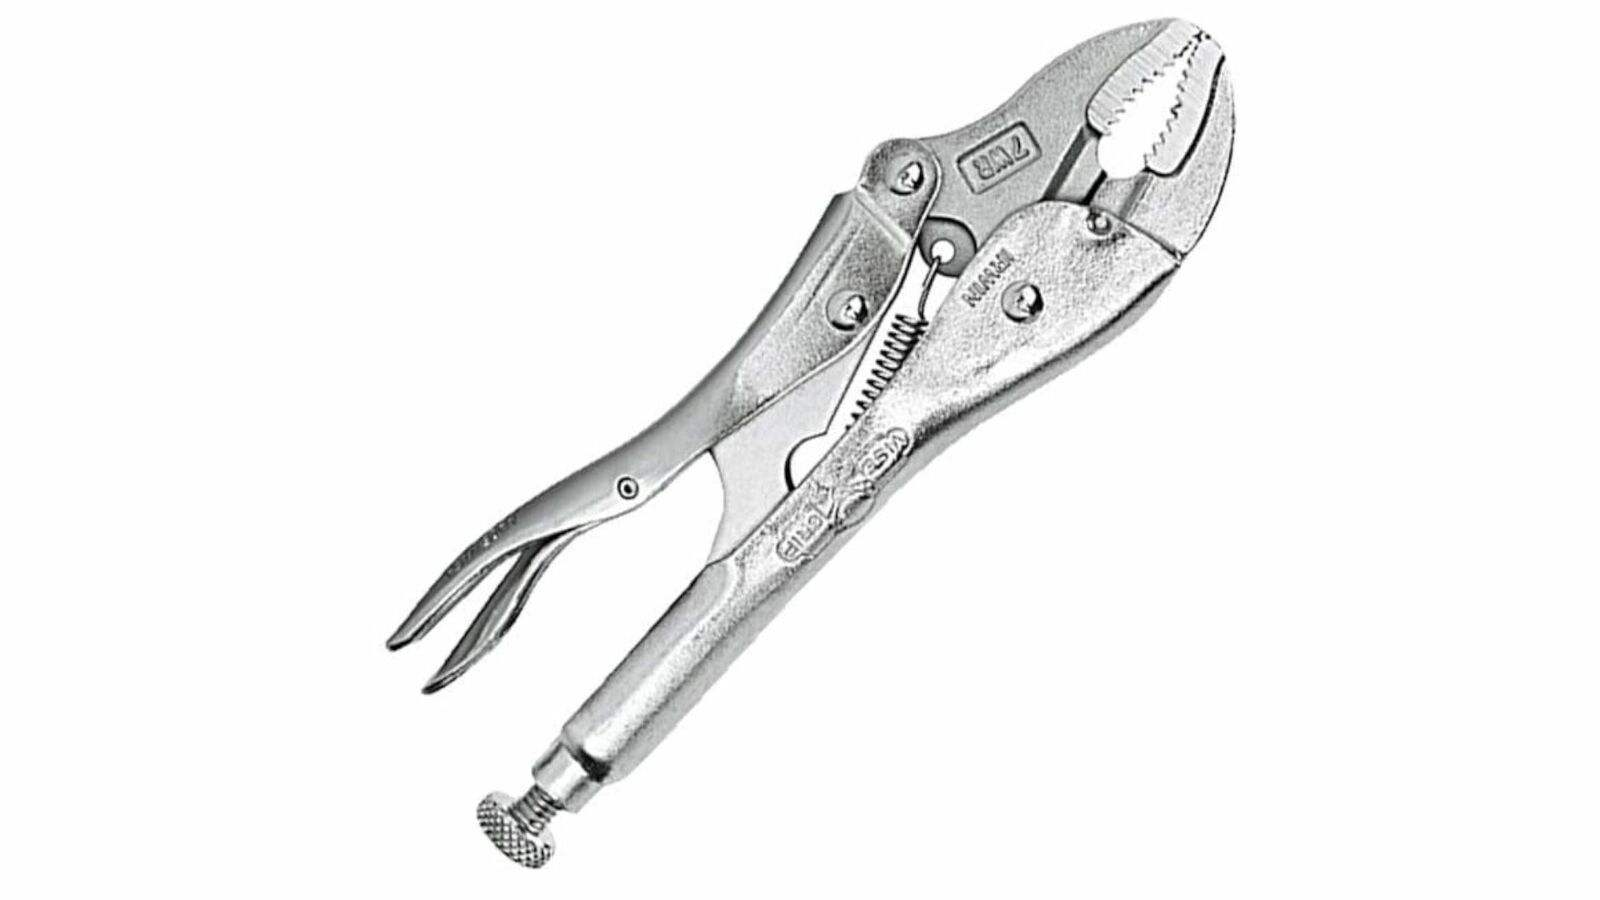 Irwin Vise Grip 702L3-7WR 7" Original Curved Jaw Locking Pliers with Wire Cutter - $40.99